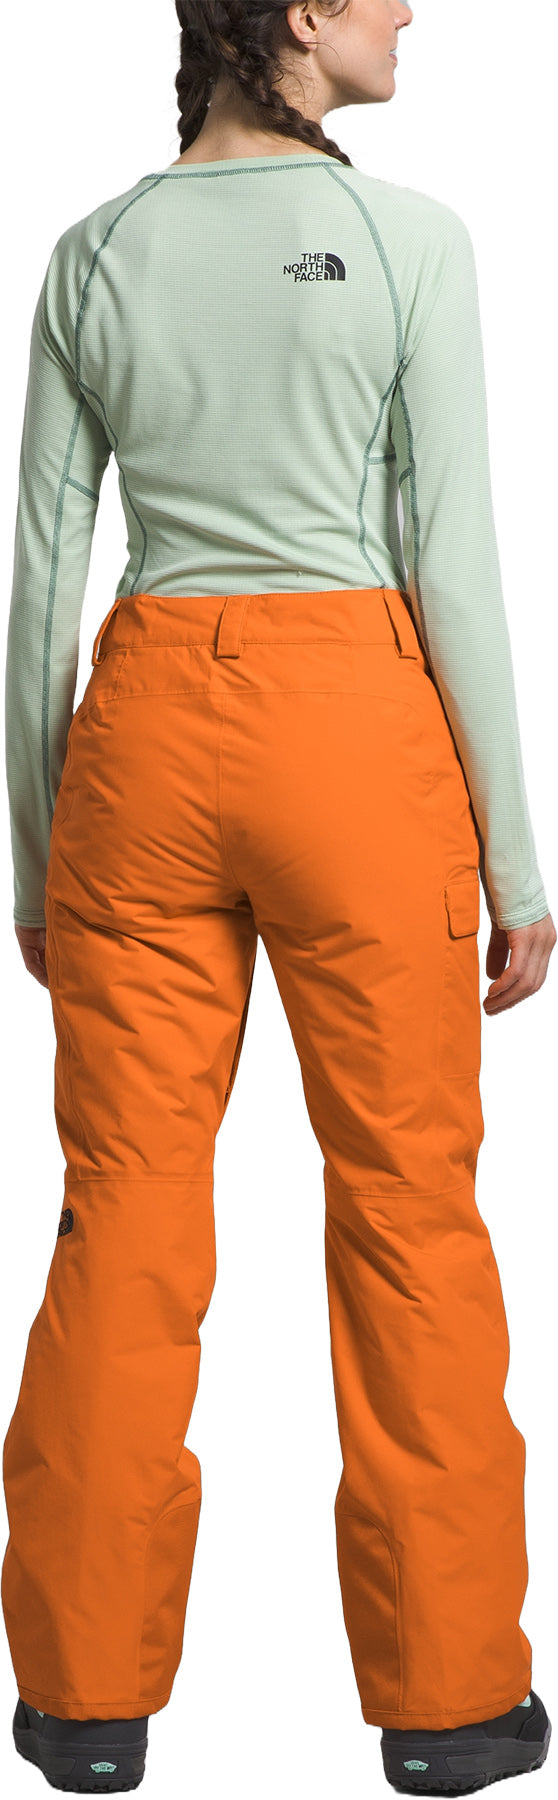 WOMEN'S FREEDOM INSULATED PANT, The North Face